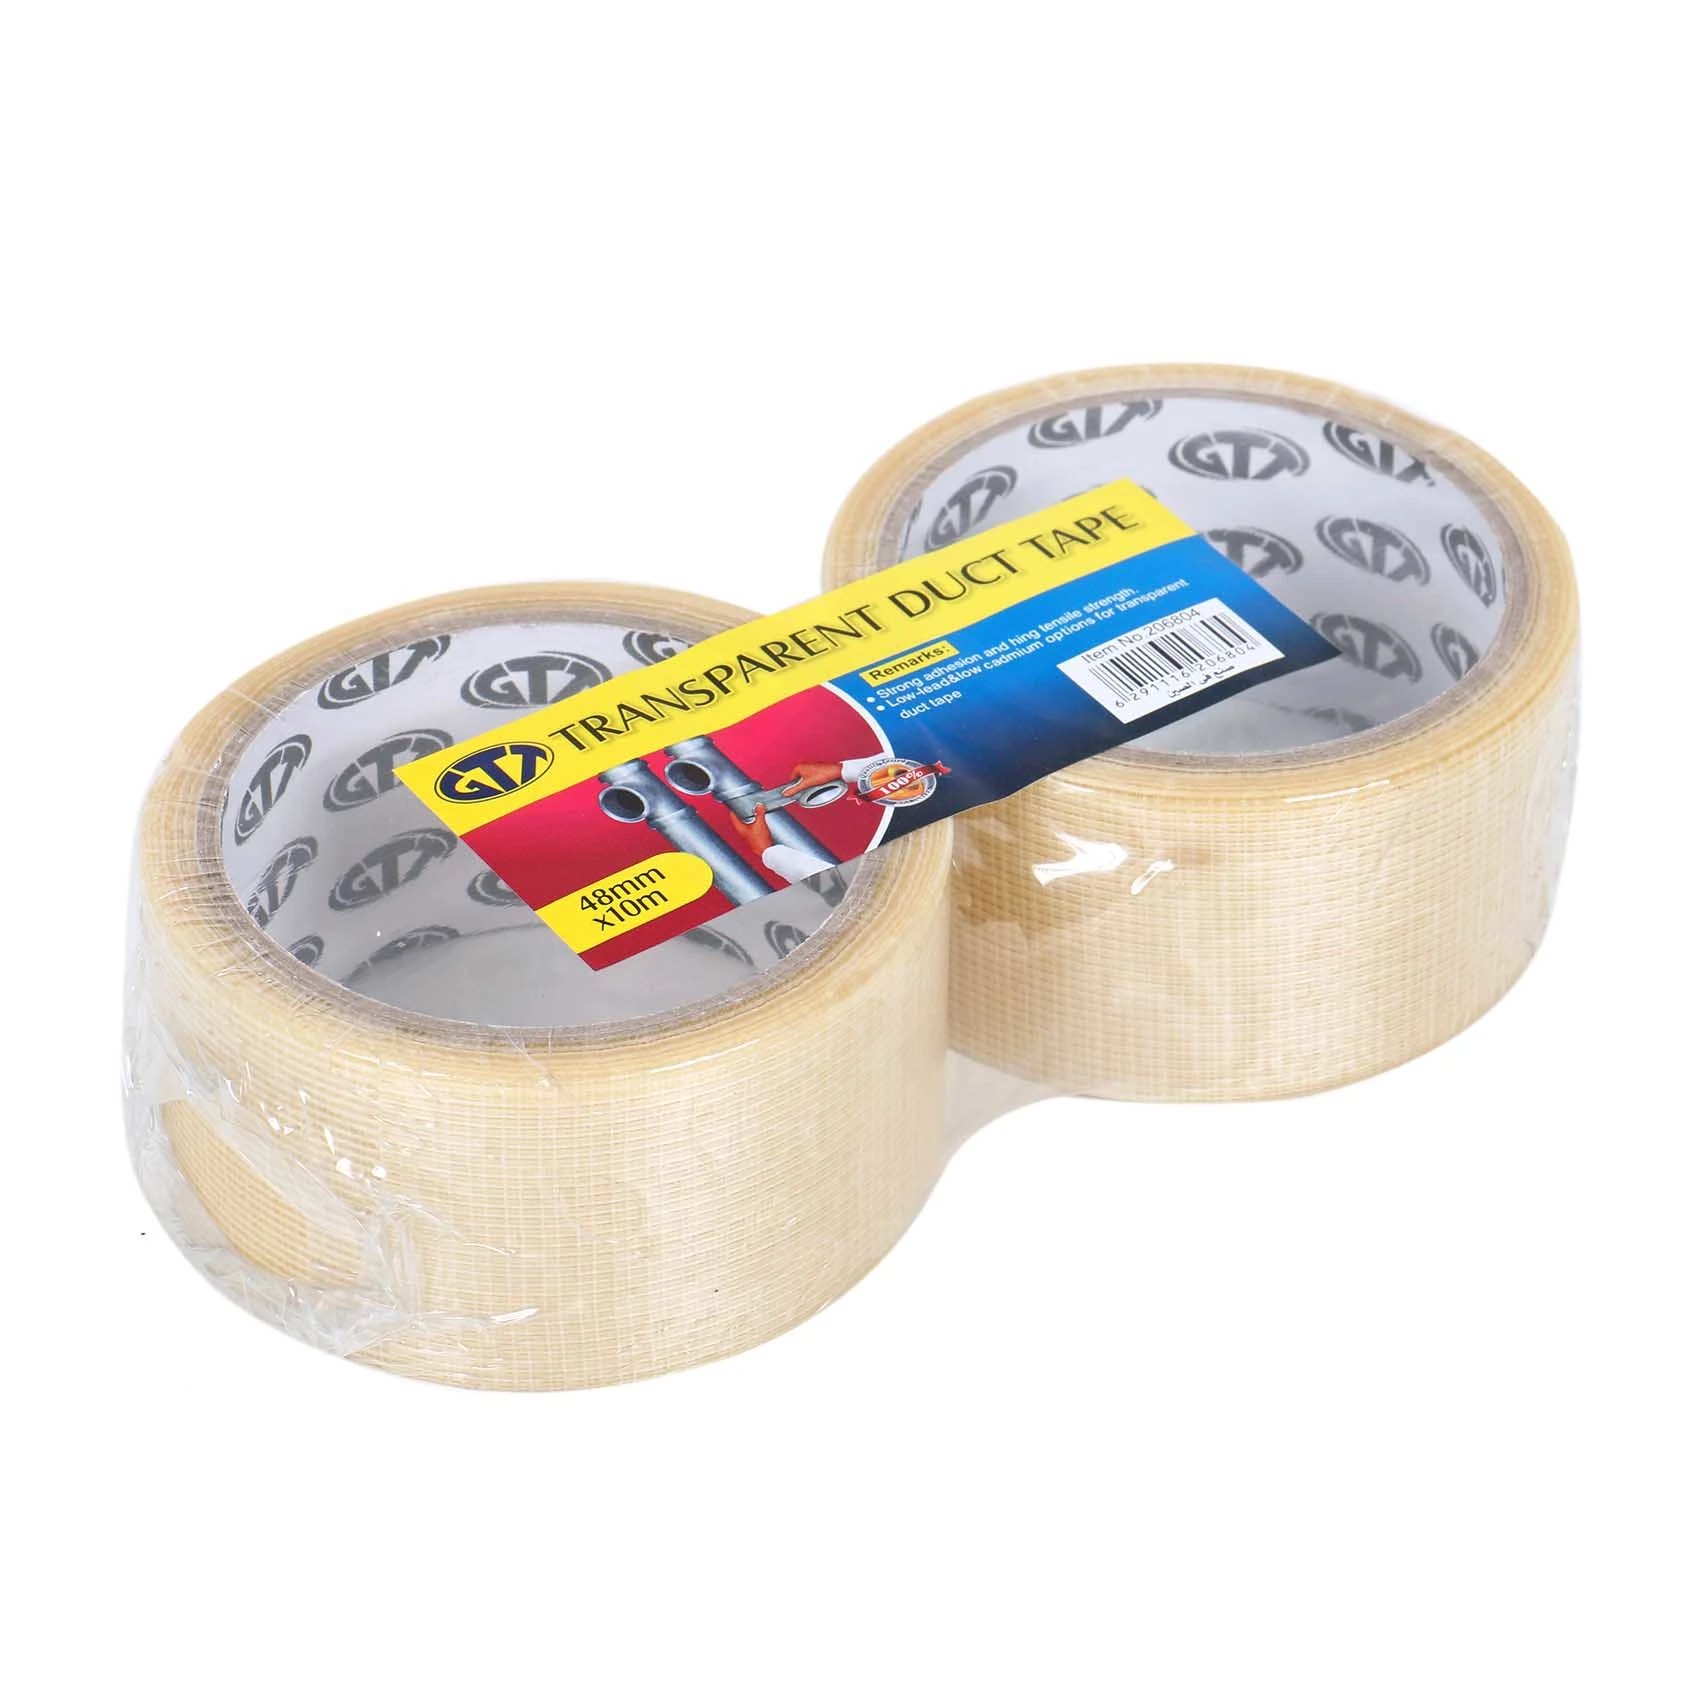 GTT TRANSPARENT DUCT TAPE| DUCT TAPE  ADHESIVE TAPE STATIONERY WALL TAPE | PUTTY TAPE 206804